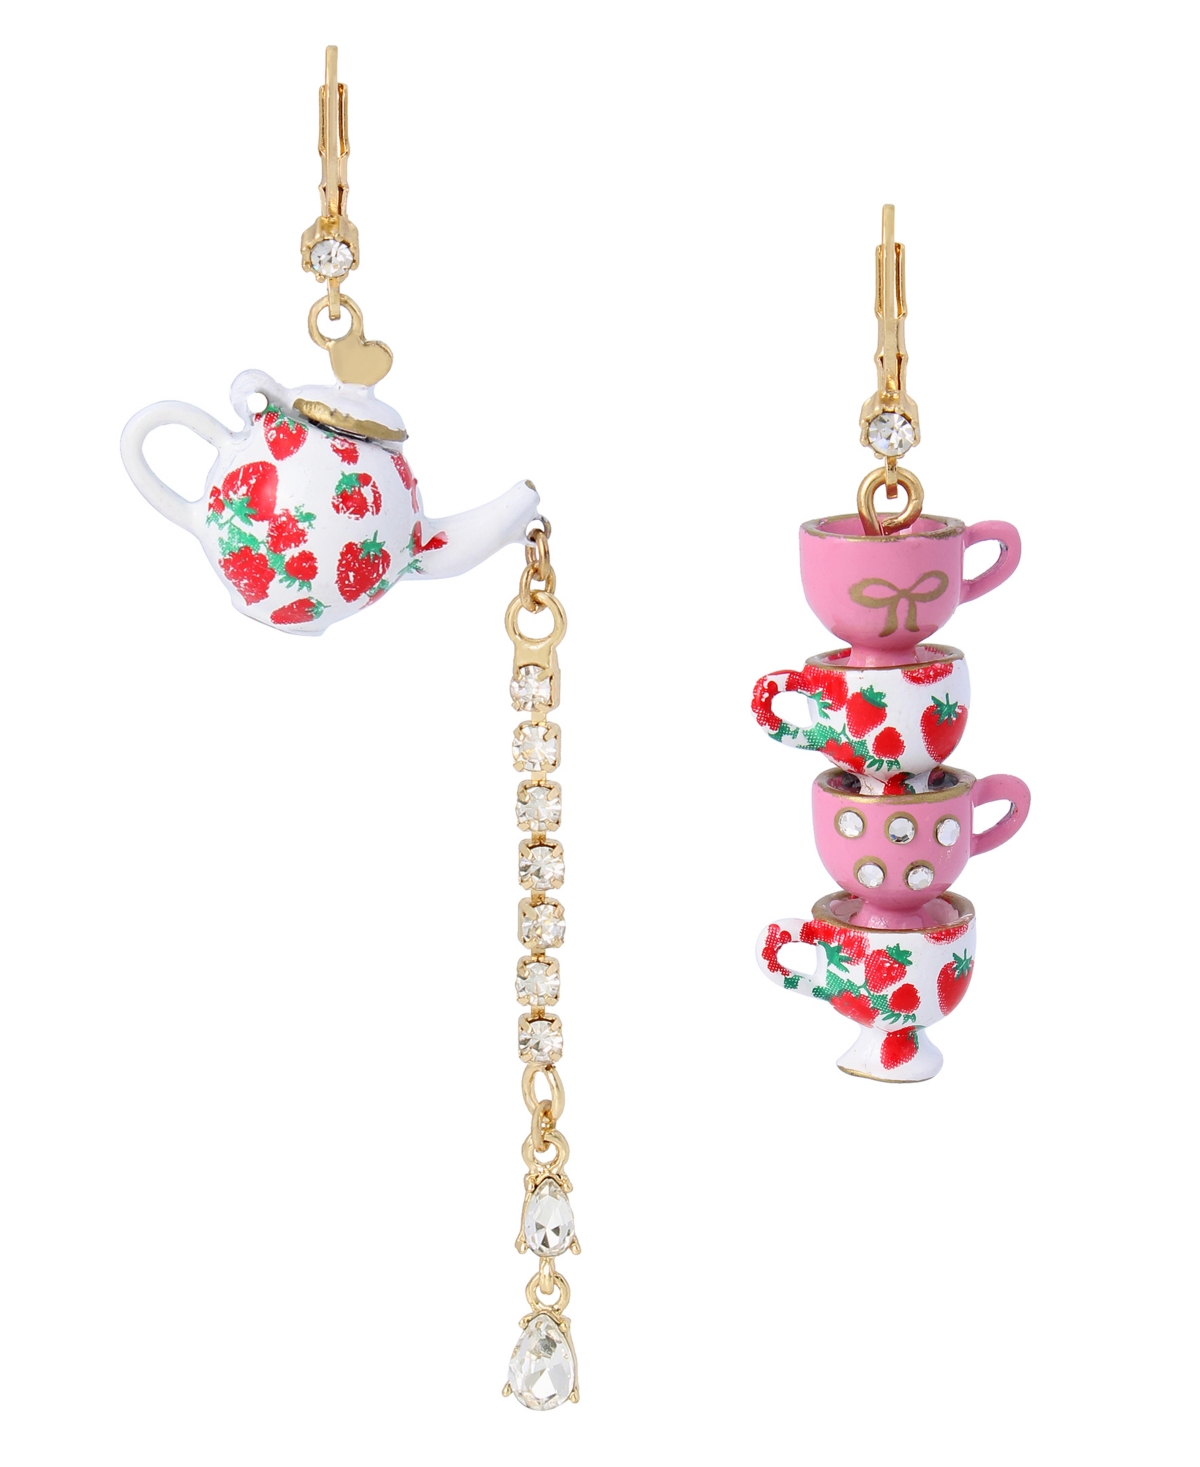 Tea Party Mismatched Earrings - Pink